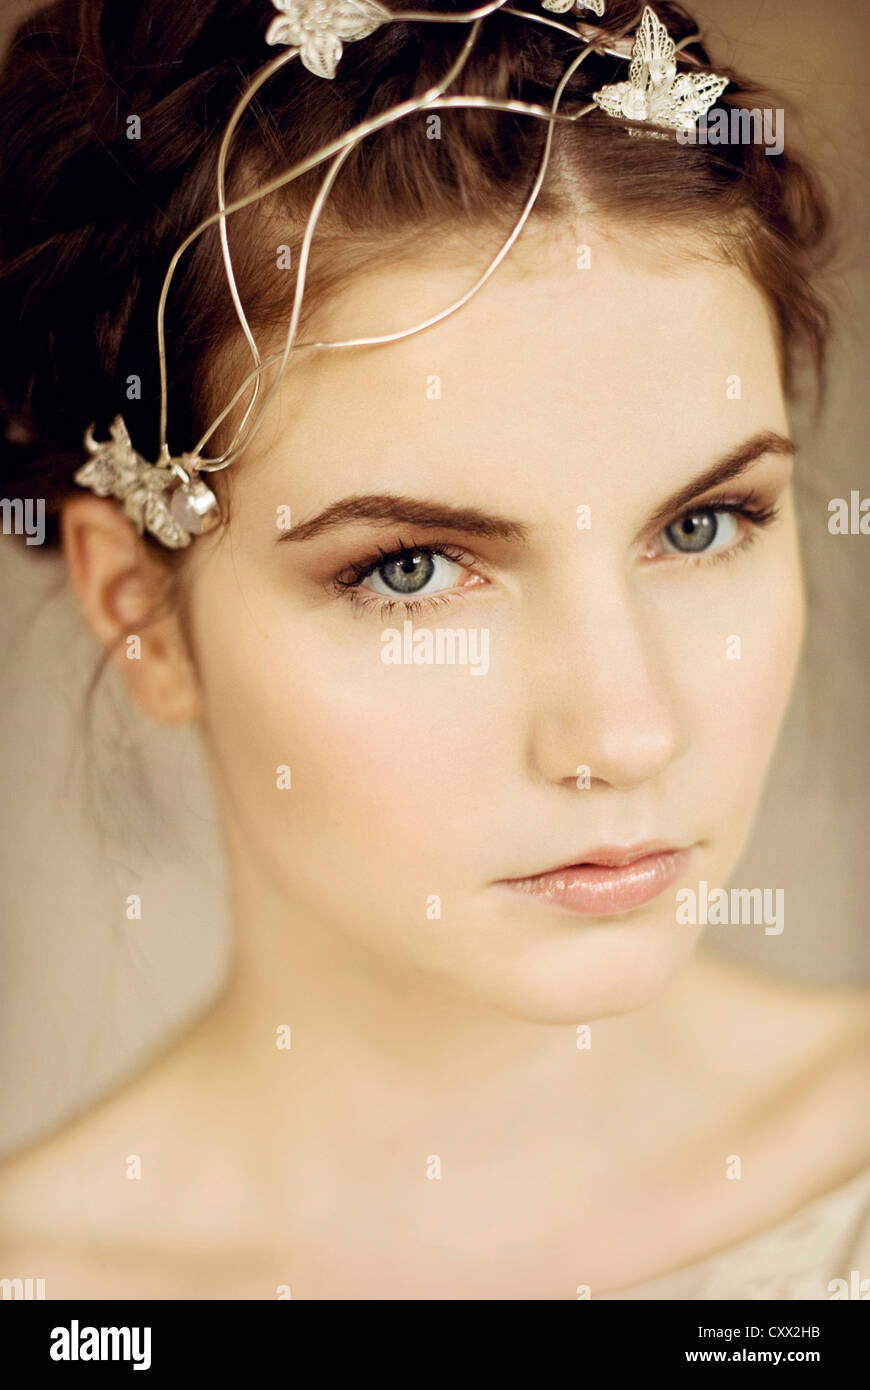 Close portrait of young woman with silver headpiece and braided hair looking into the camera Stock Photo